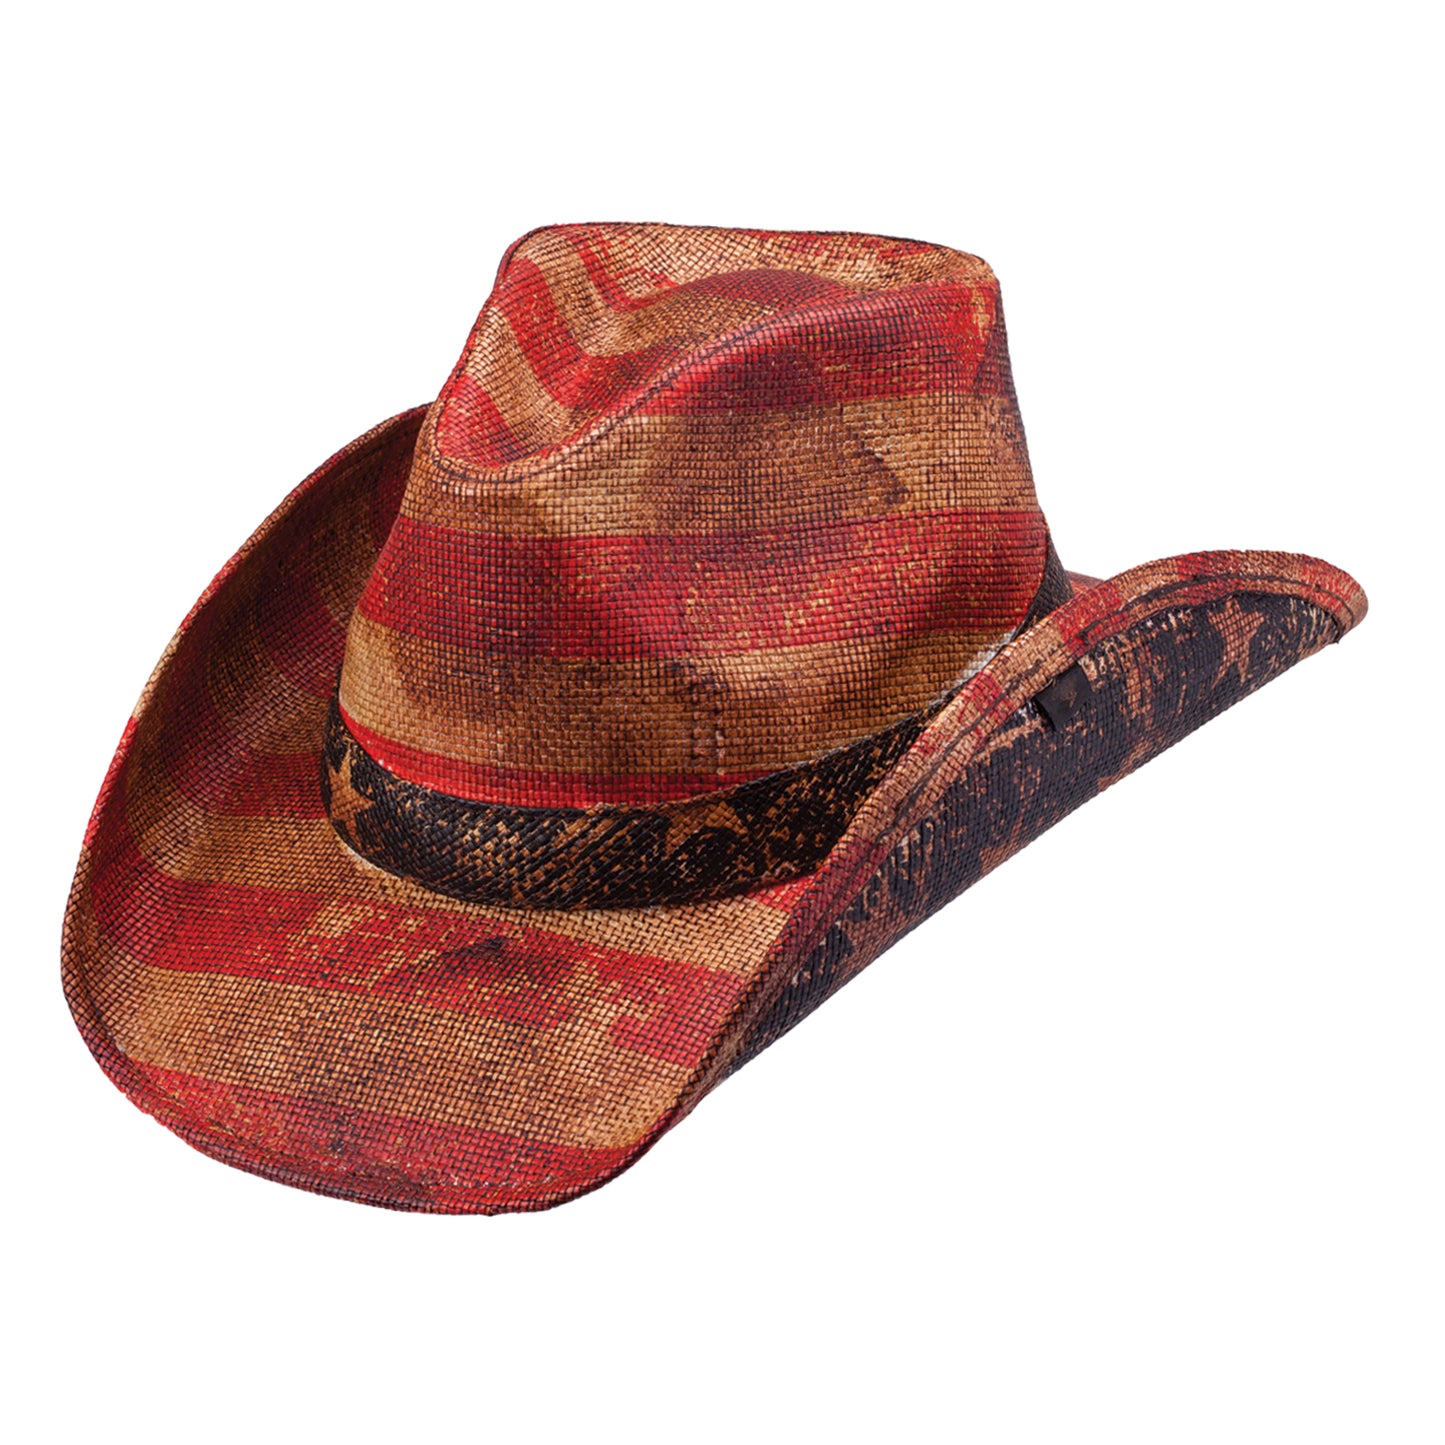 Patriot Red White Blue USA Cowboy Hat by Peter Grimm - Bourbon Cowgirl